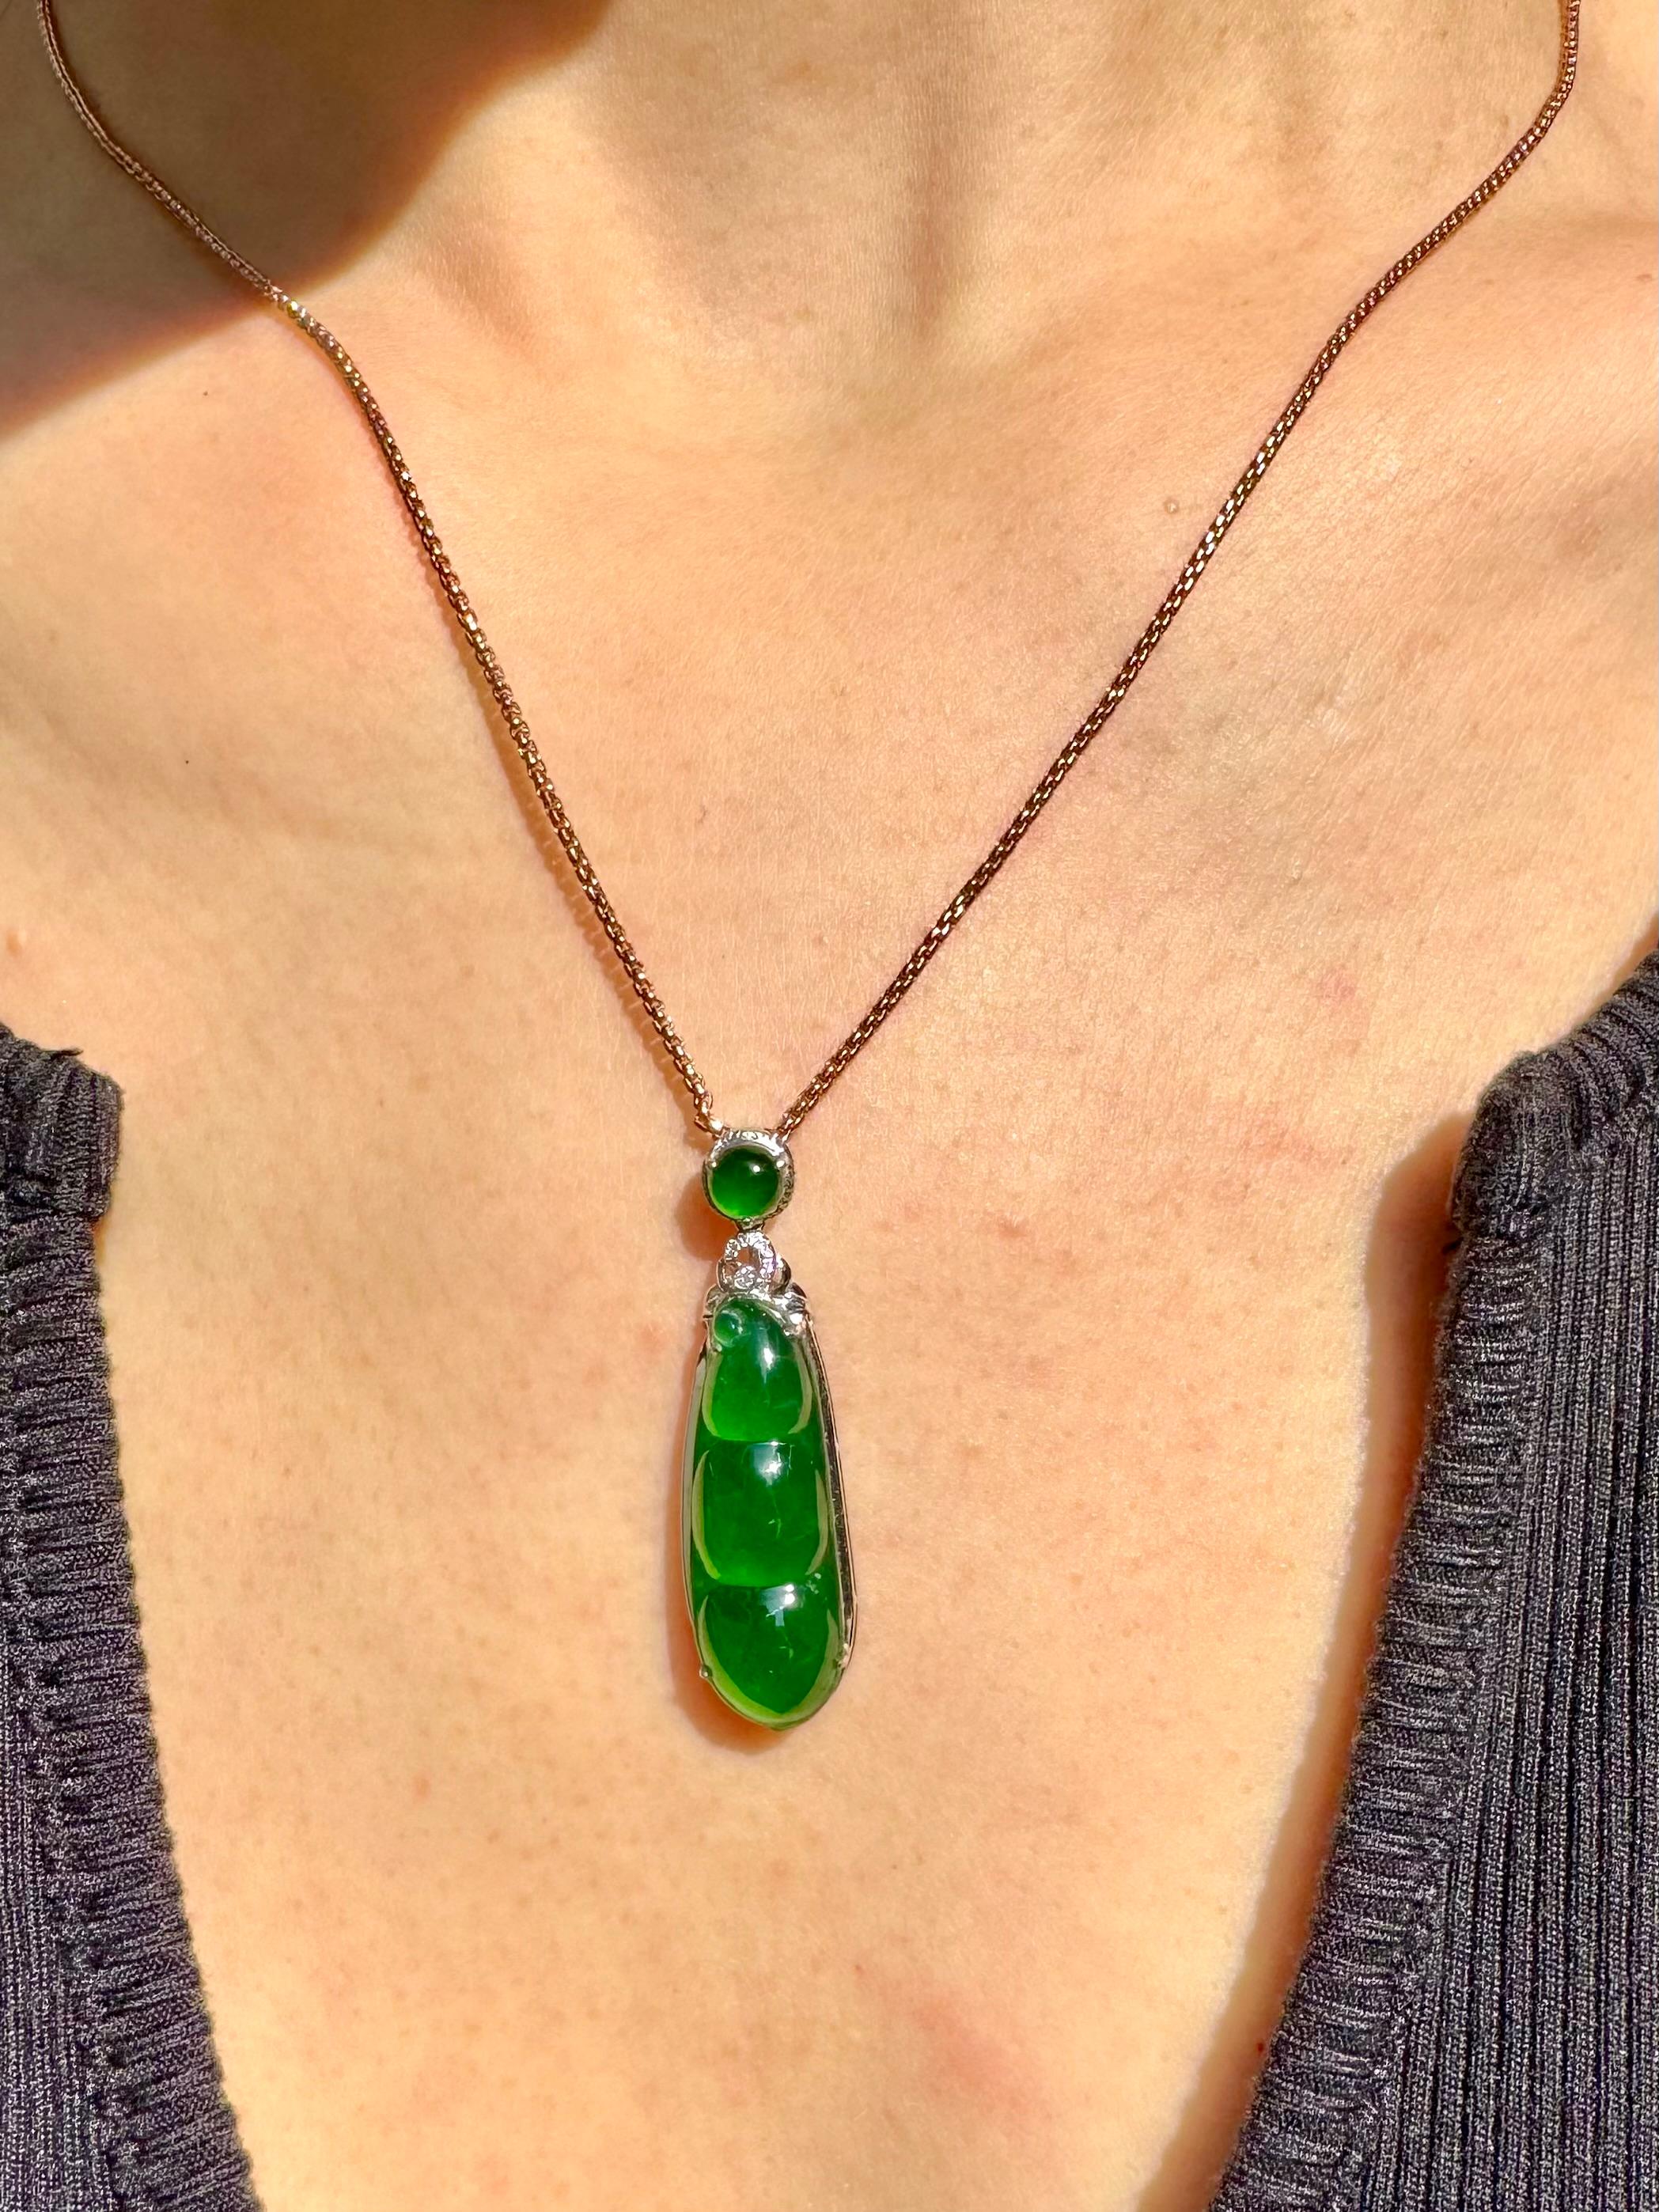 Please check out the HD video. This icy imperial Jadeite jade pendant is certified to be natural and without any treatments. To qualify as true imperial jade, it must have BOTH strong saturations of vivid green color AND a very high degree of